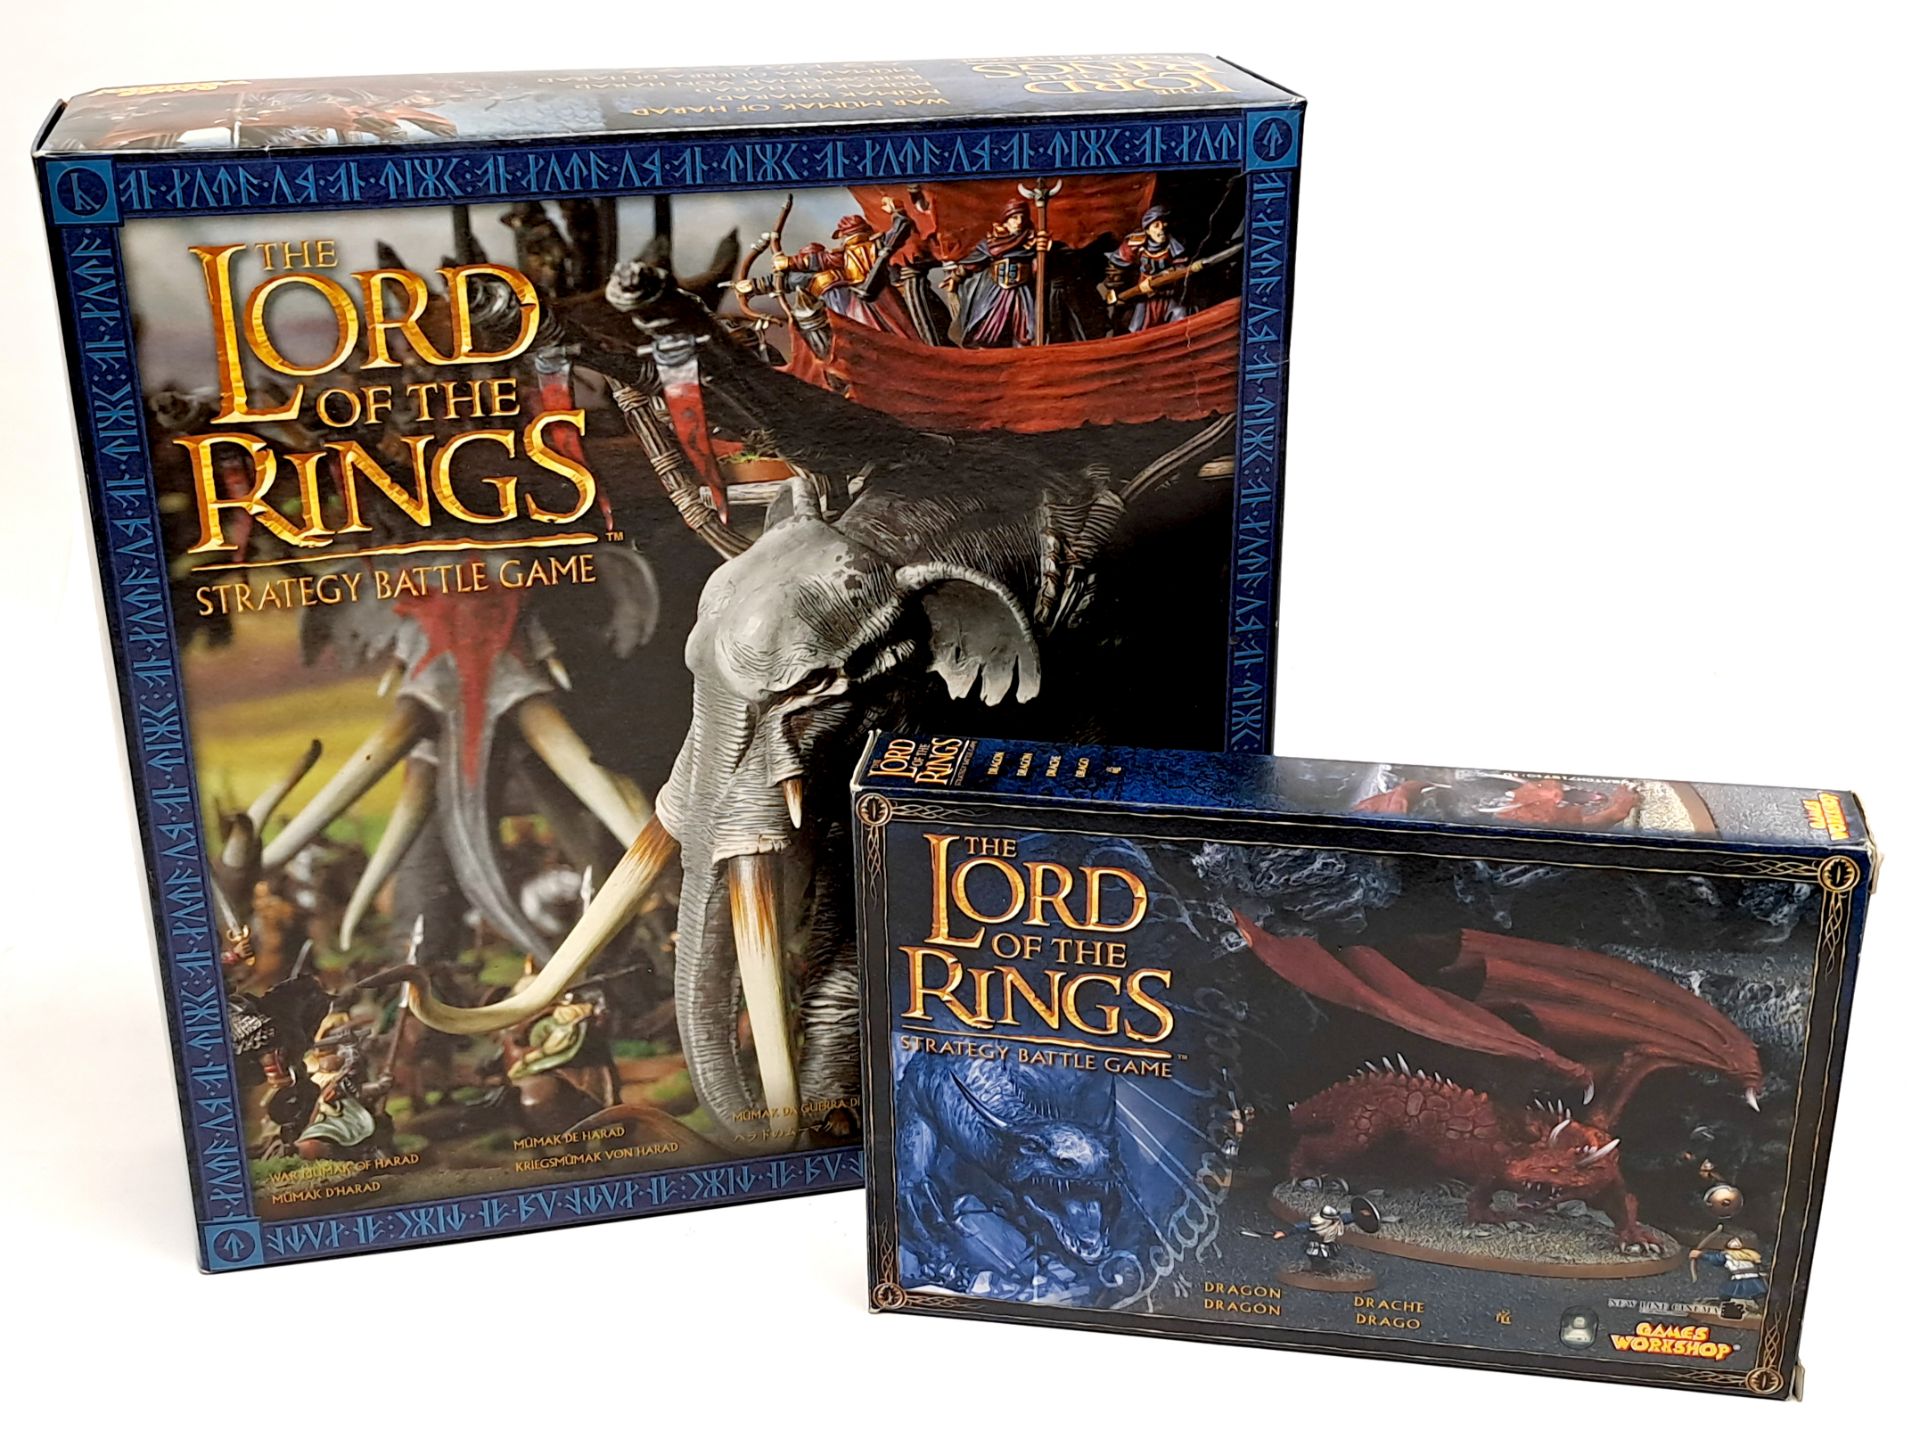 Games Workshop / Citadel, The Lord of the Rings Strategy Battle Game Dragon & War Mumak of Harad